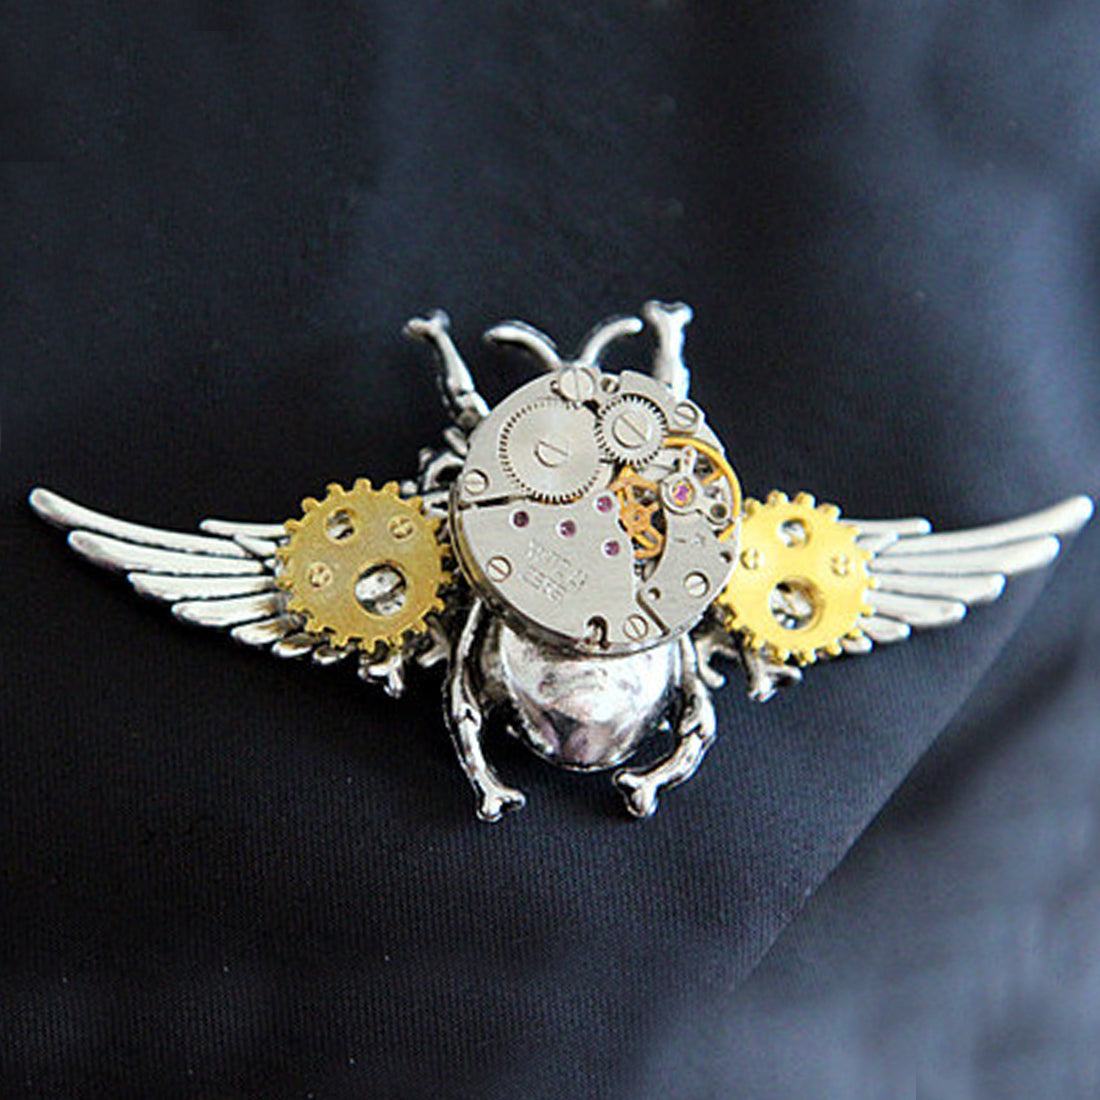 Assembled Steampunk Beetle Insect Gear Brooch